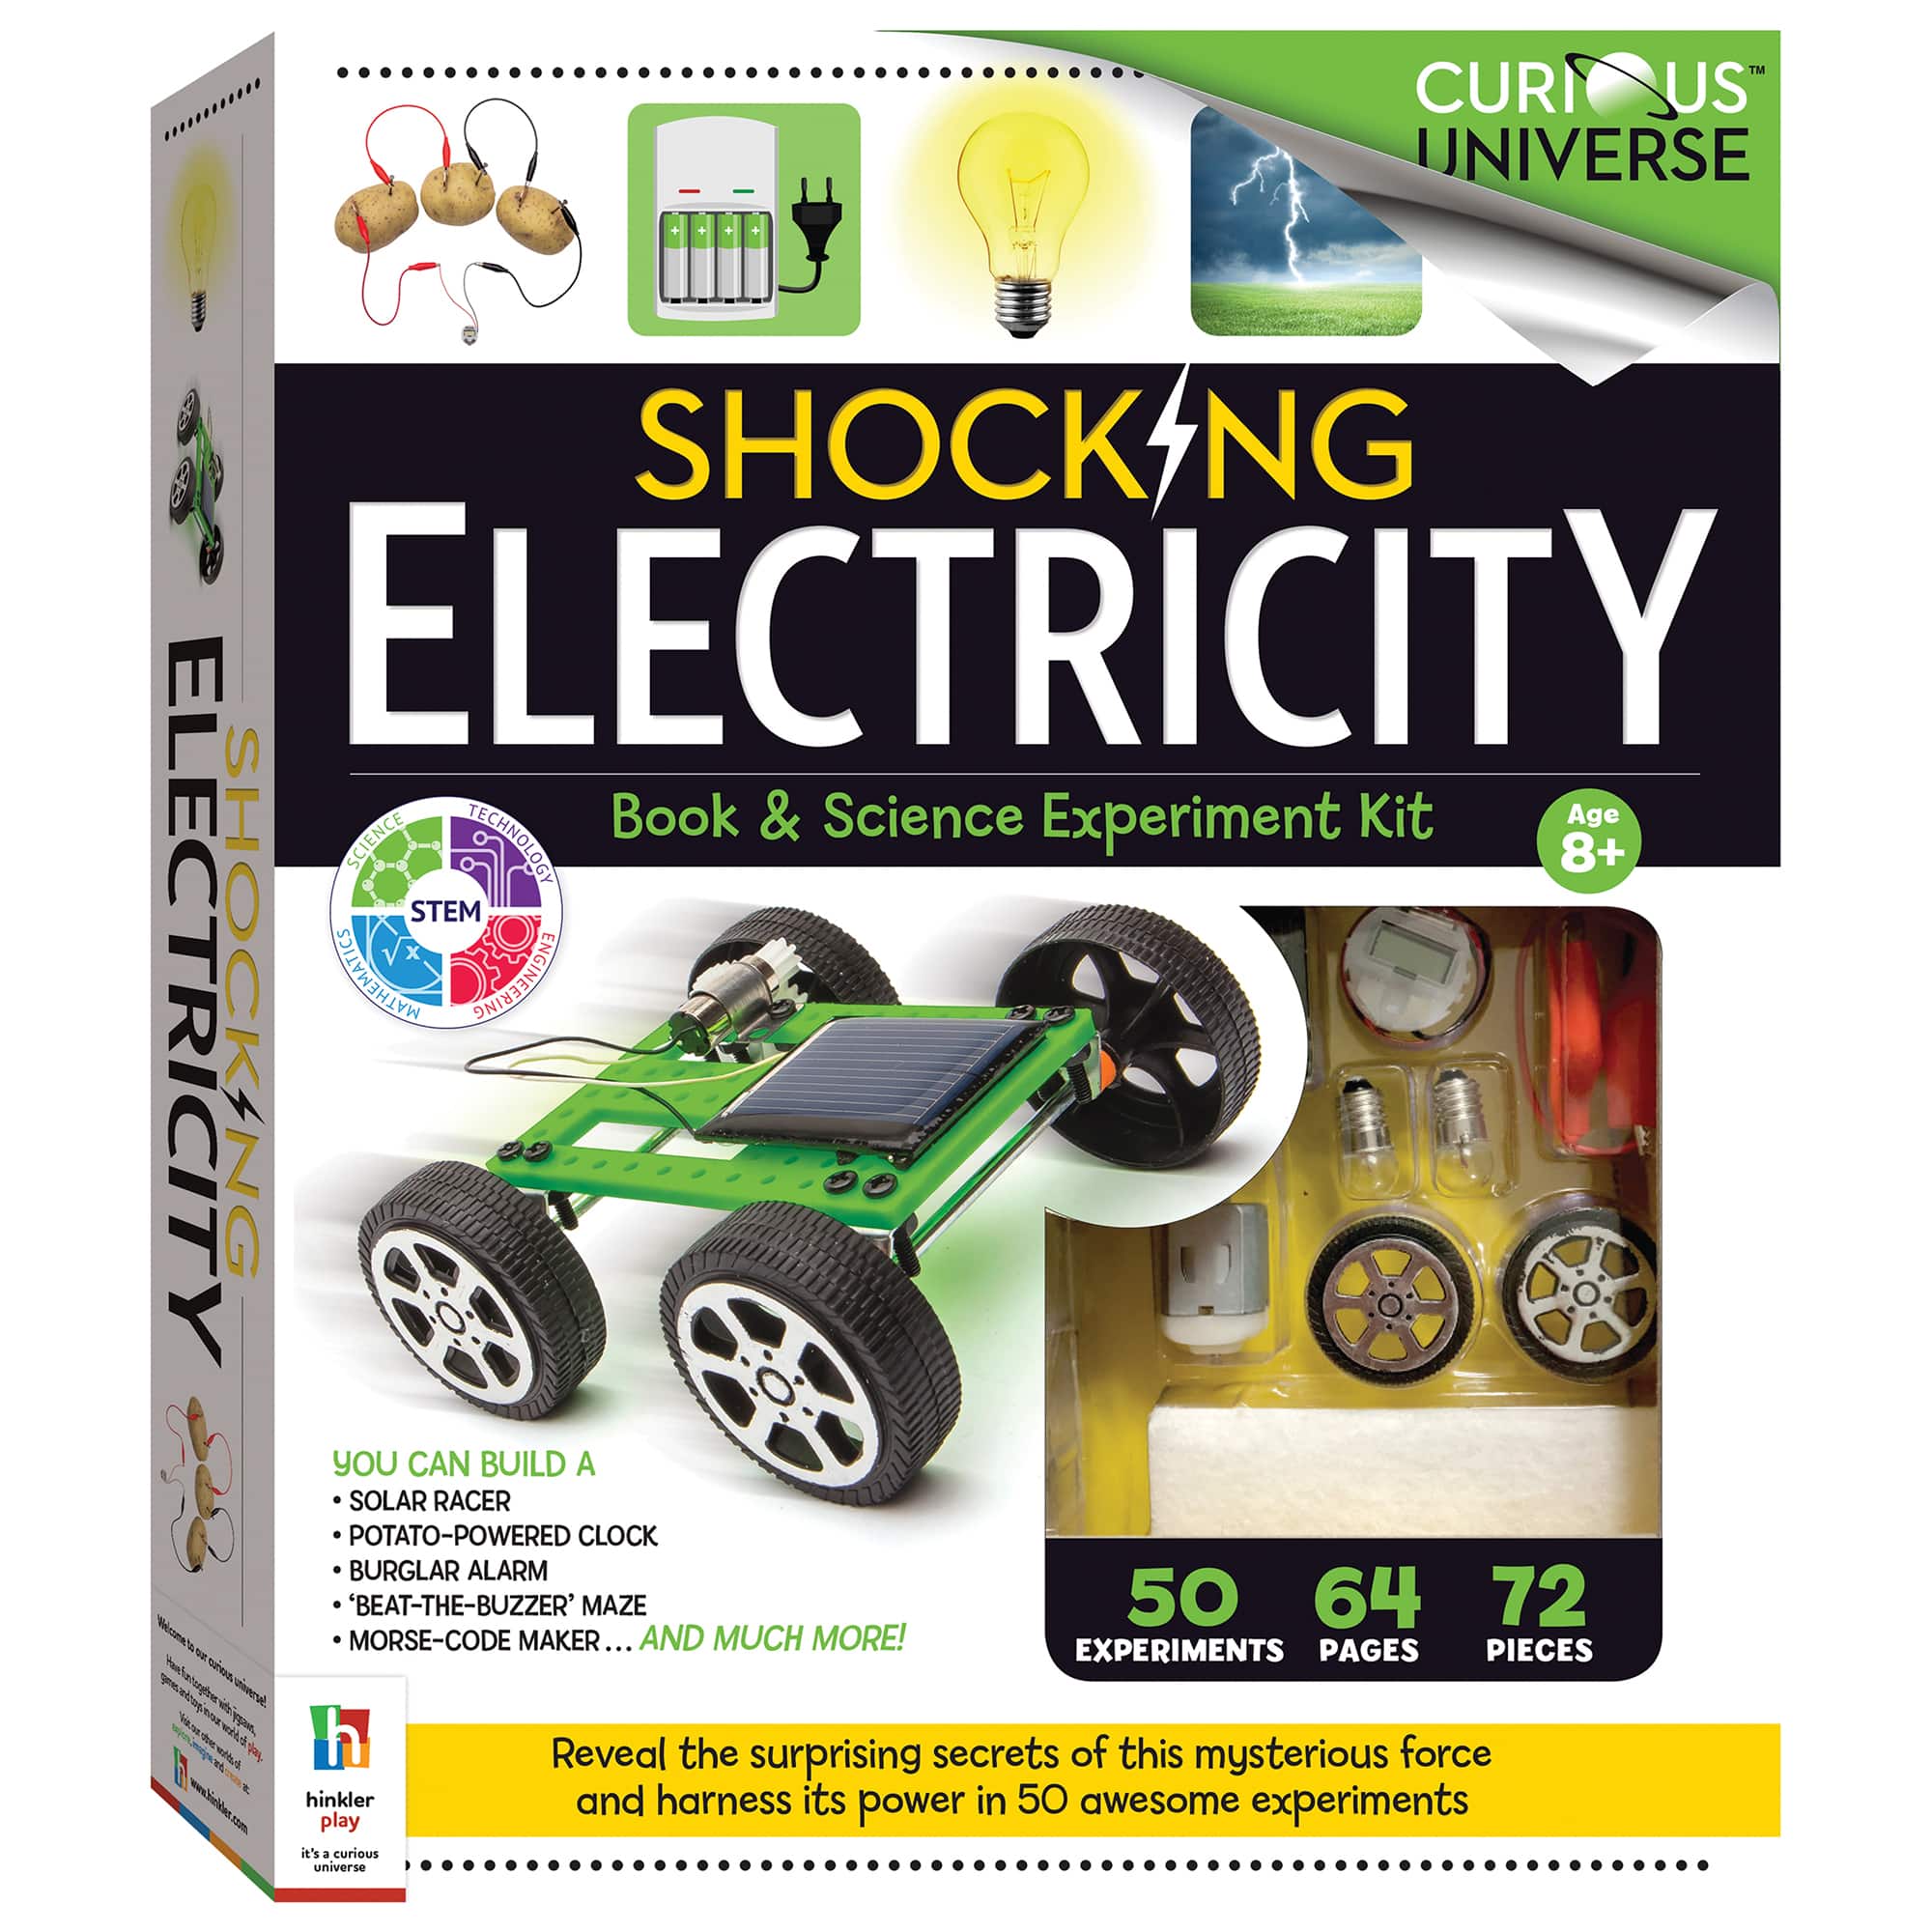 Hinkler Curious Universe&#x2122; Shocking Electricity Science Kit